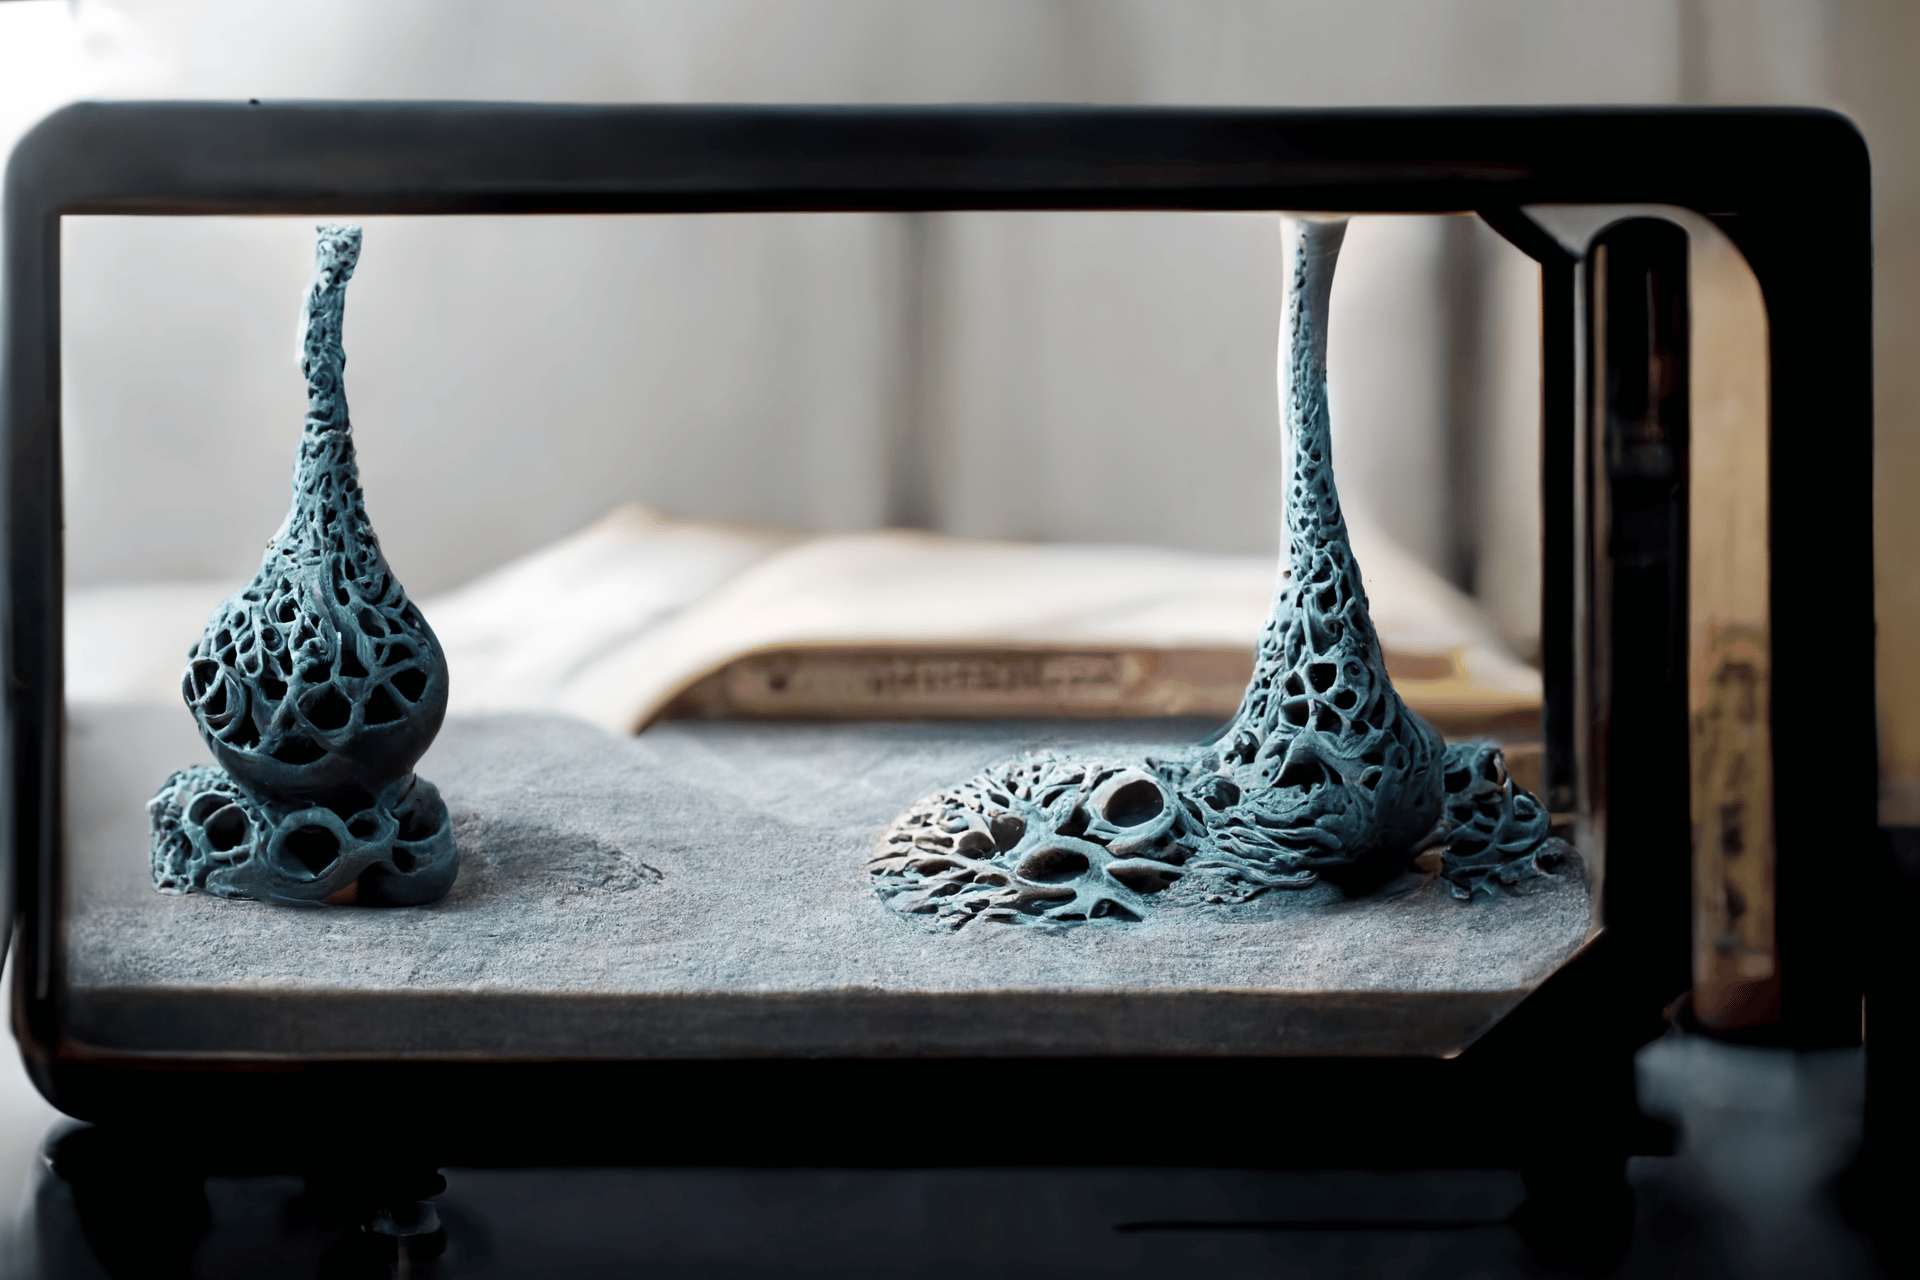 3D Printing Is Expanding